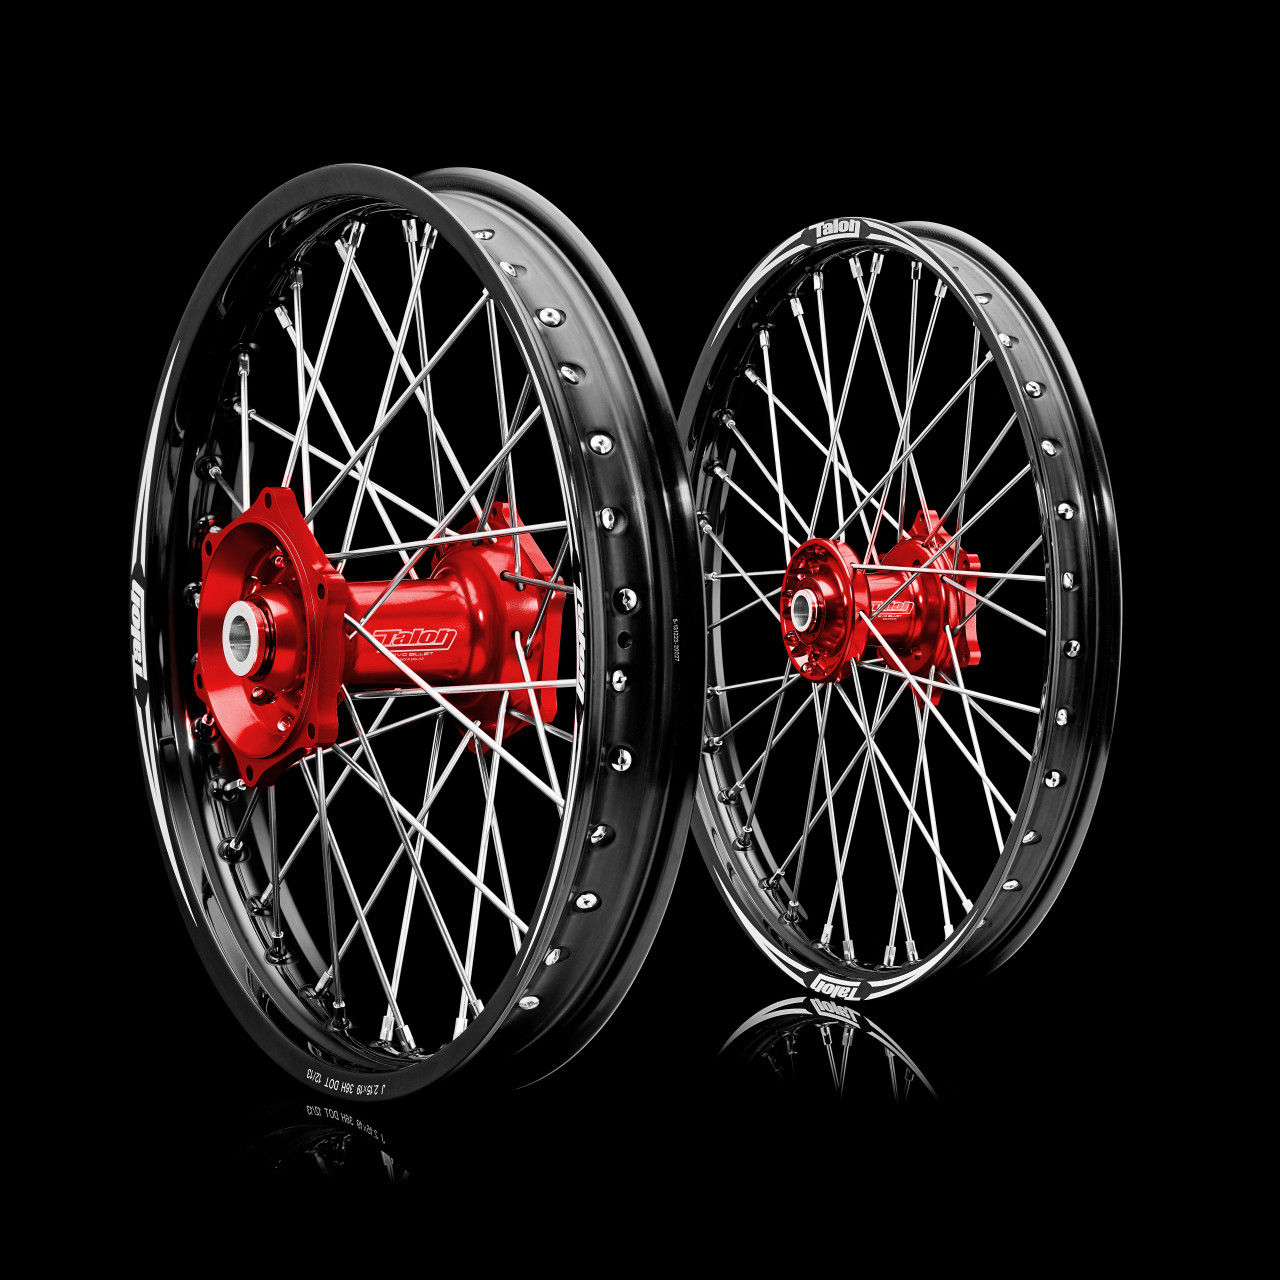 SPOKE WRAPS FOR HONDA CR 125 CRF 250 CRF 450 RED FRONT AND REAR WHEELS 